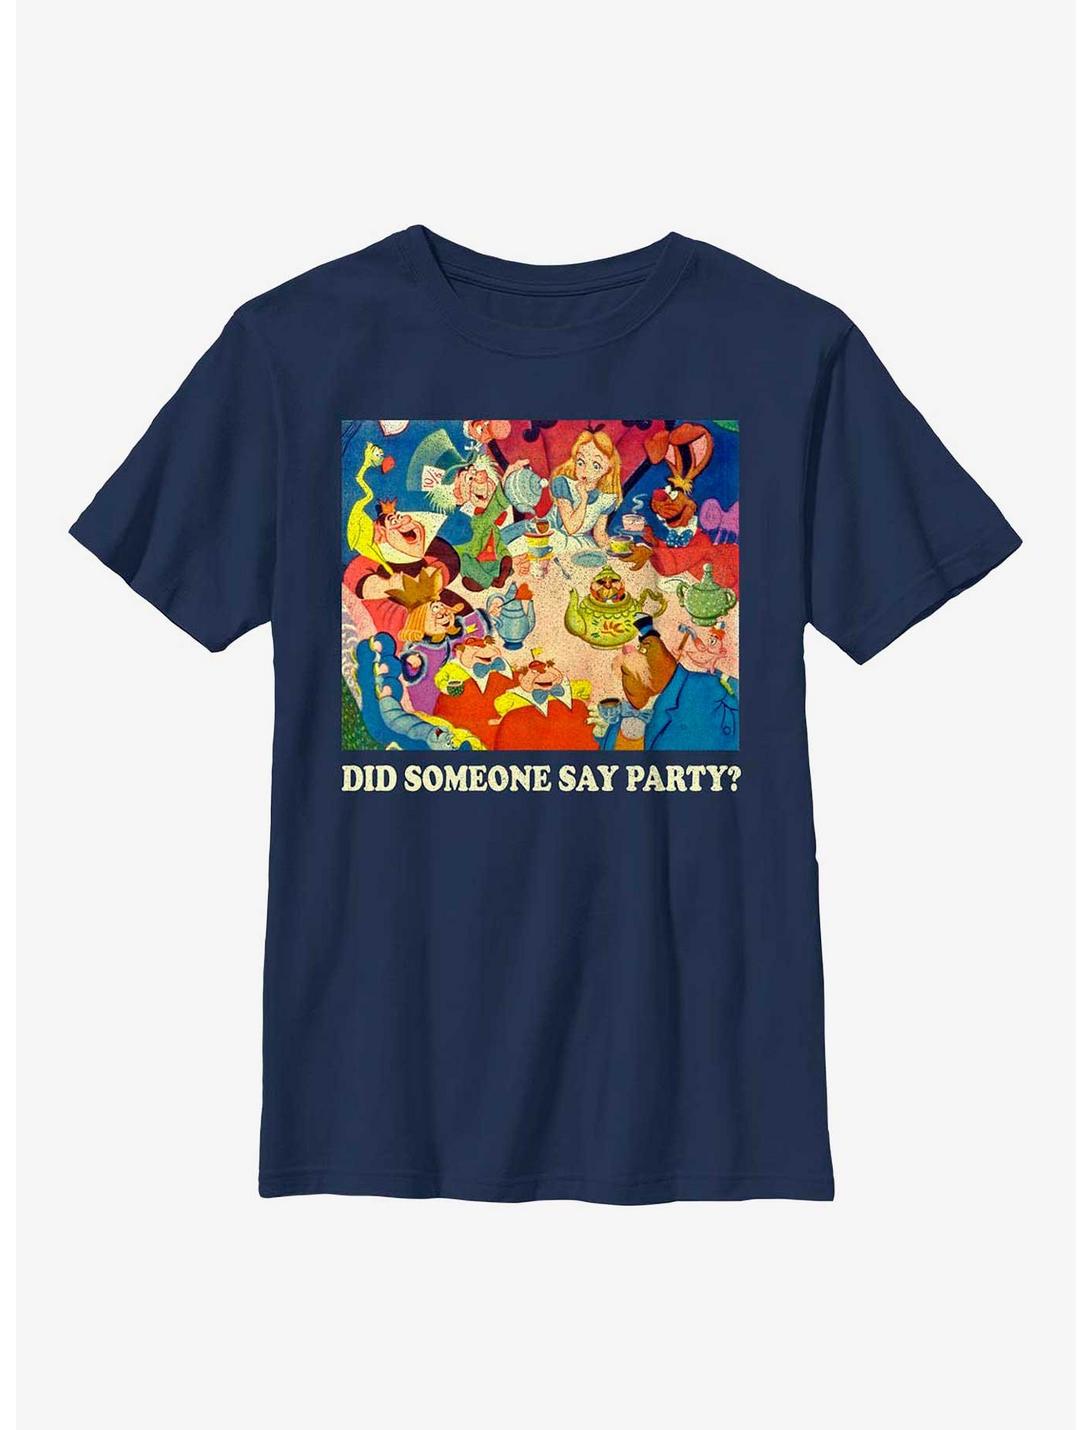 Disney Alice In Wonderland Did Someone Say Party? Youth T-Shirt, NAVY, hi-res